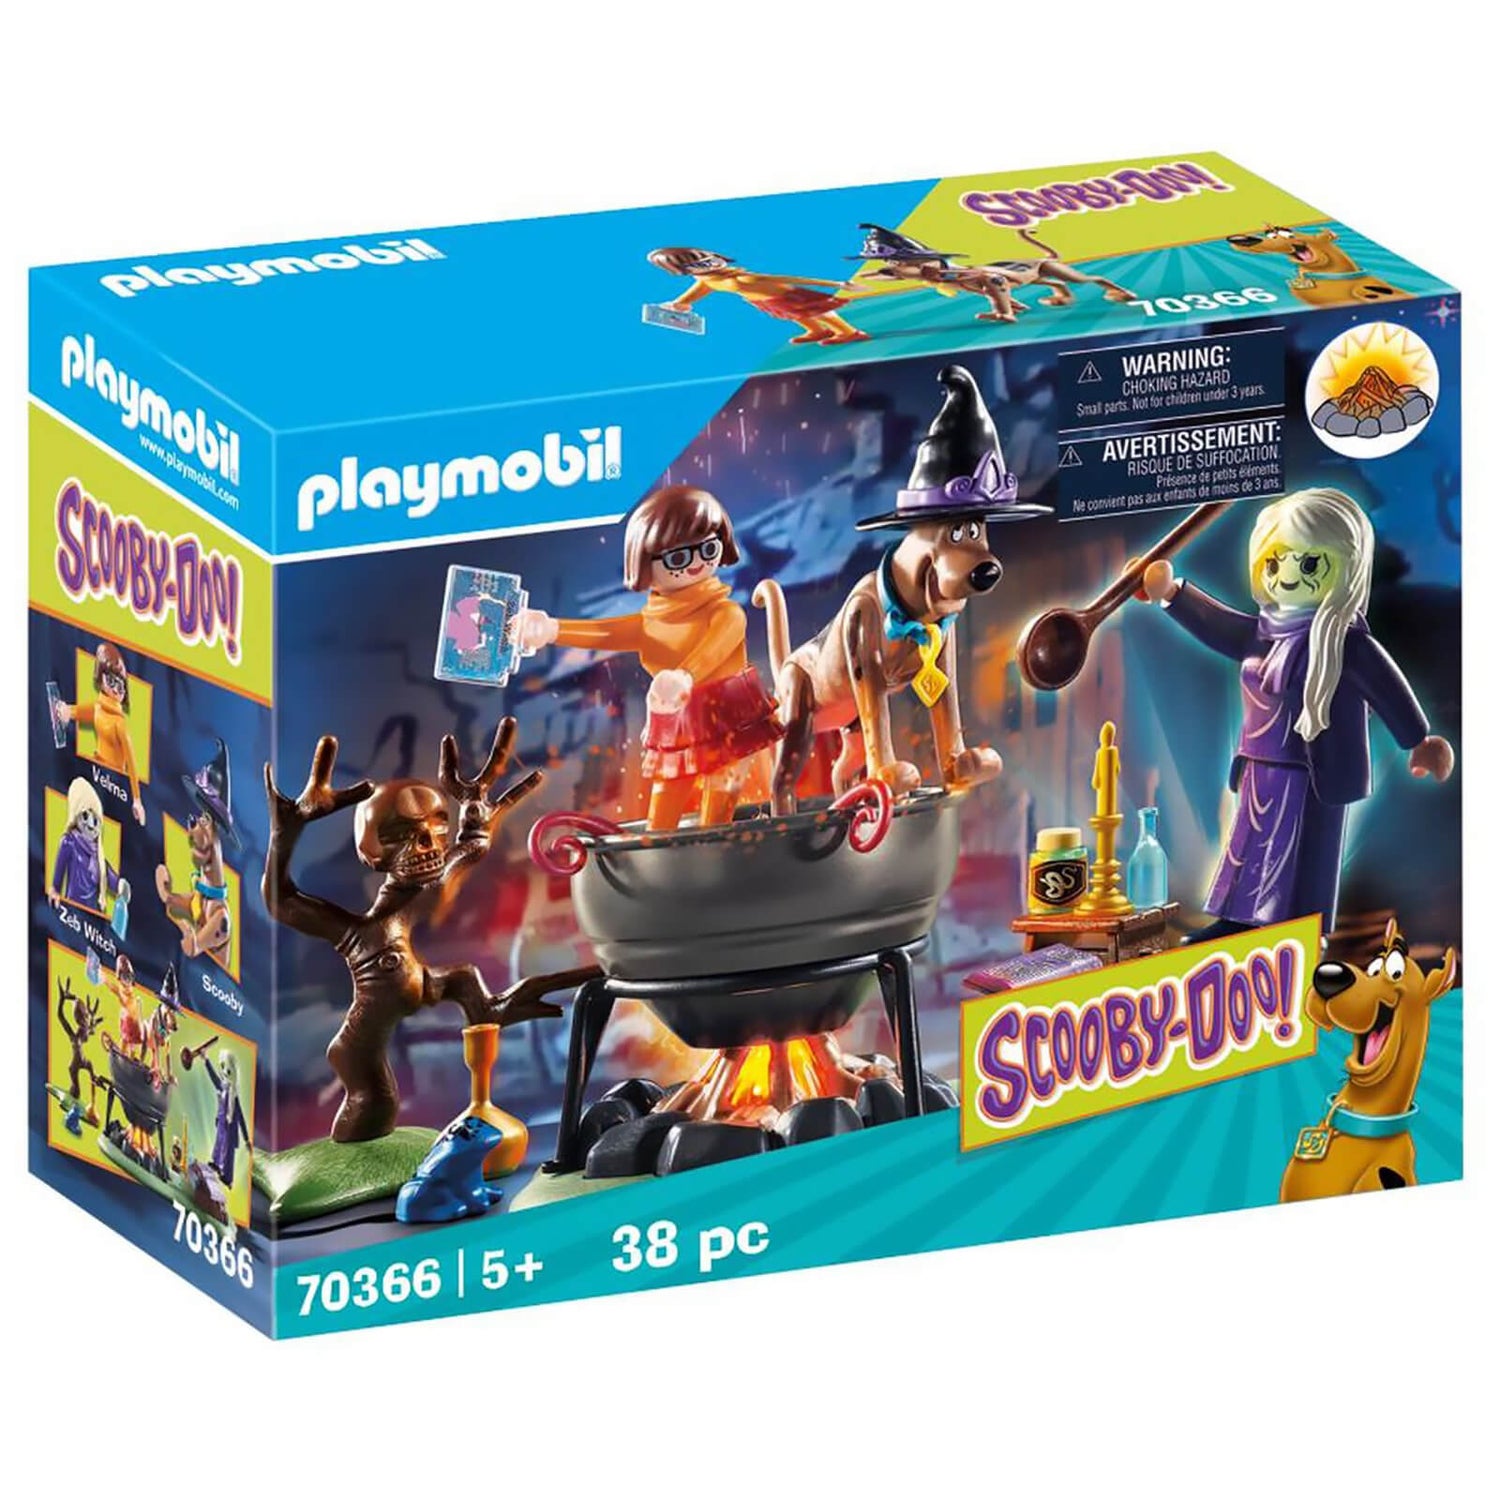 Playmobil Scooby Doo! Adventure in the Witch's Cauldron (70366)